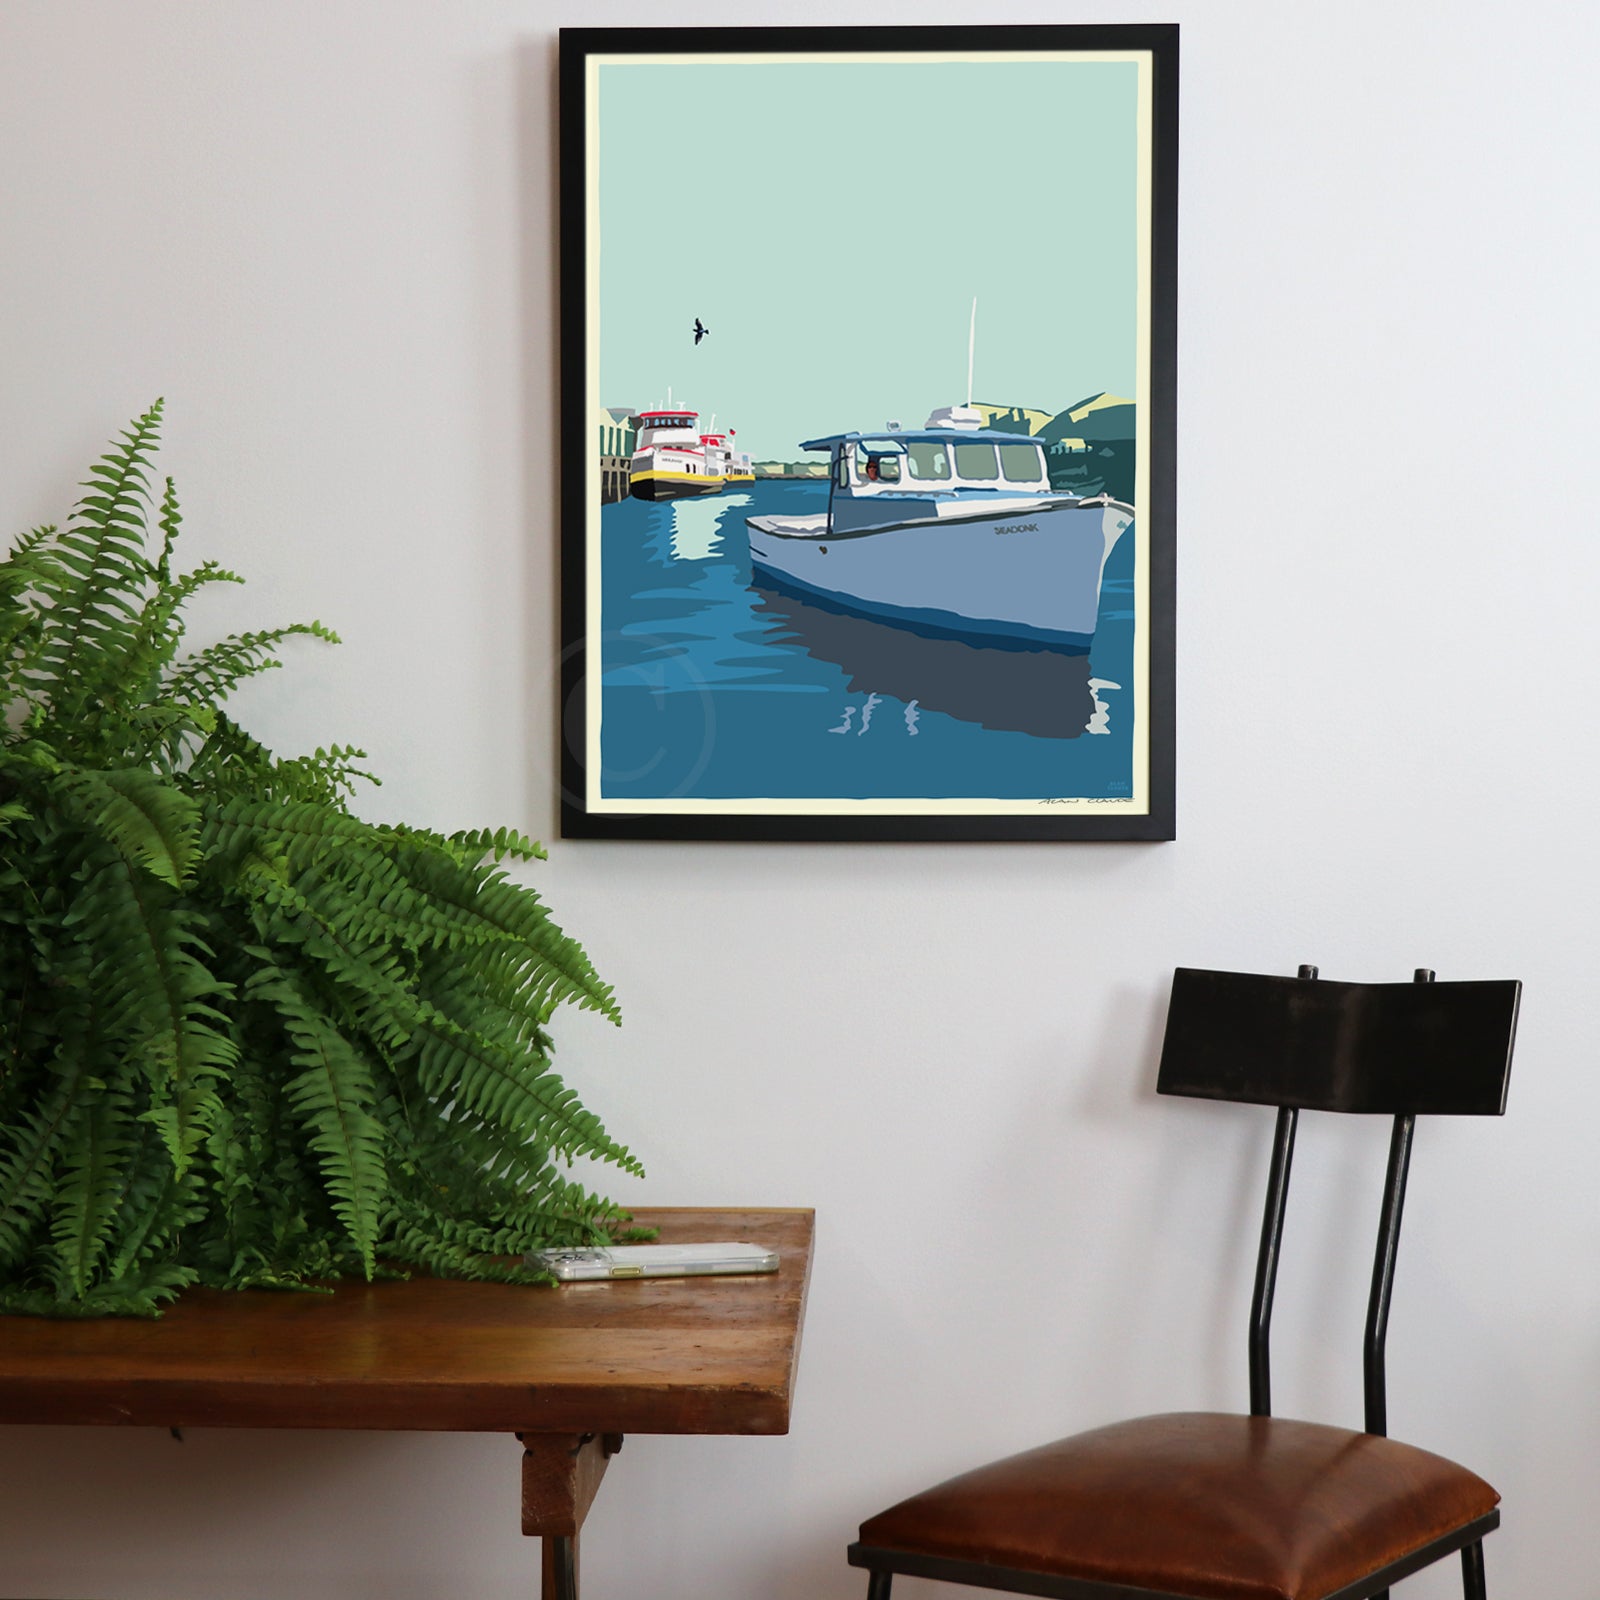 Coming Home Art Print 18" x 24" Framed Wall Poster By Alan Claude - Maine